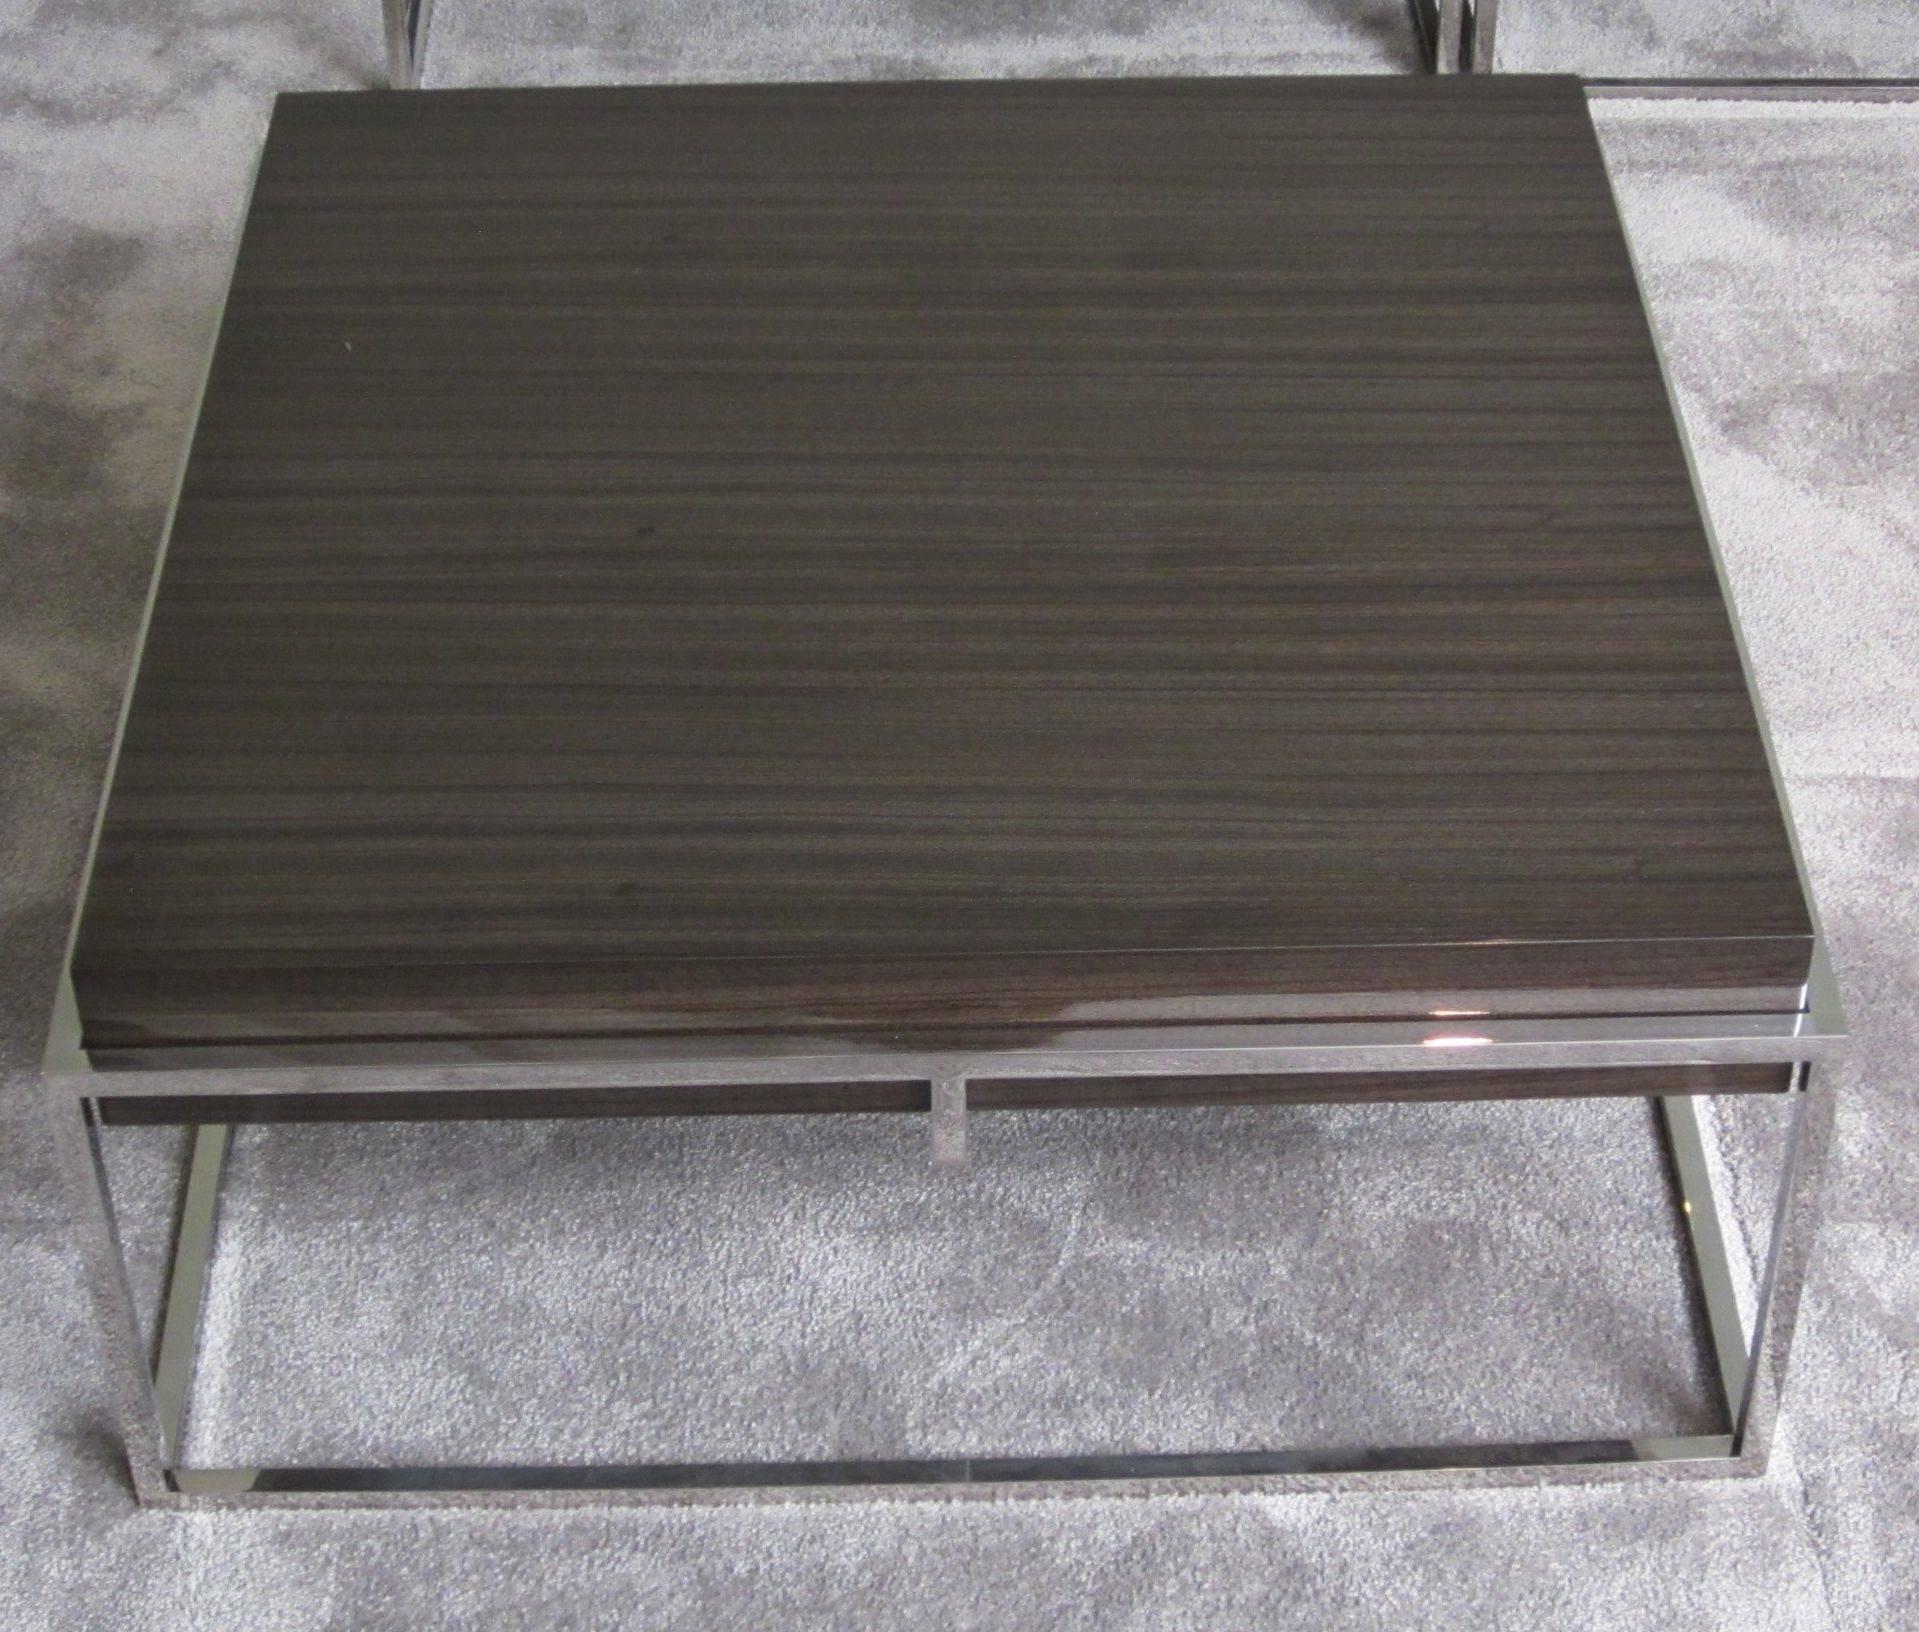 Belgian Square Polished Stainless Base, Wood Top Coffee Table, Belgium, Contemporary